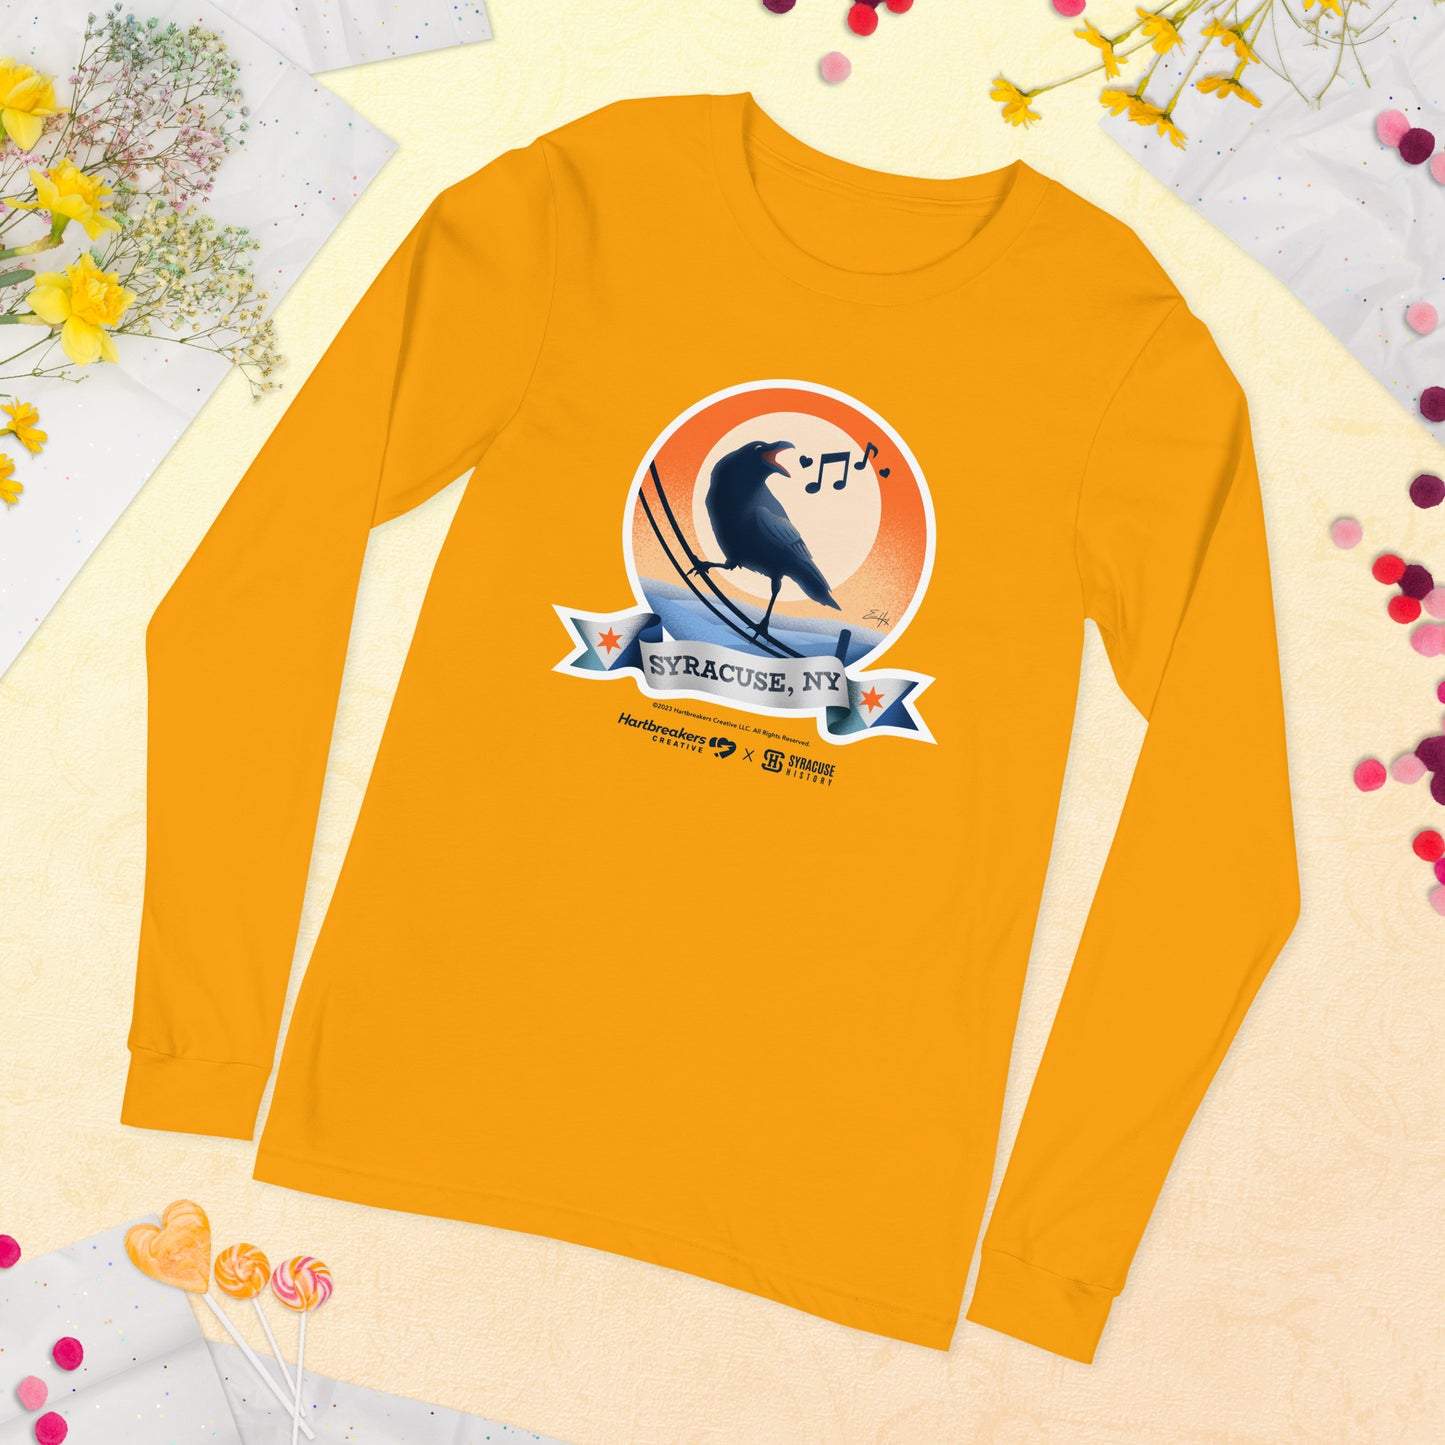 A gold-colored long sleeve T-shirt featuring an illustration of a crow on a telephone wire and a banner beneath it that says Syracuse, NY